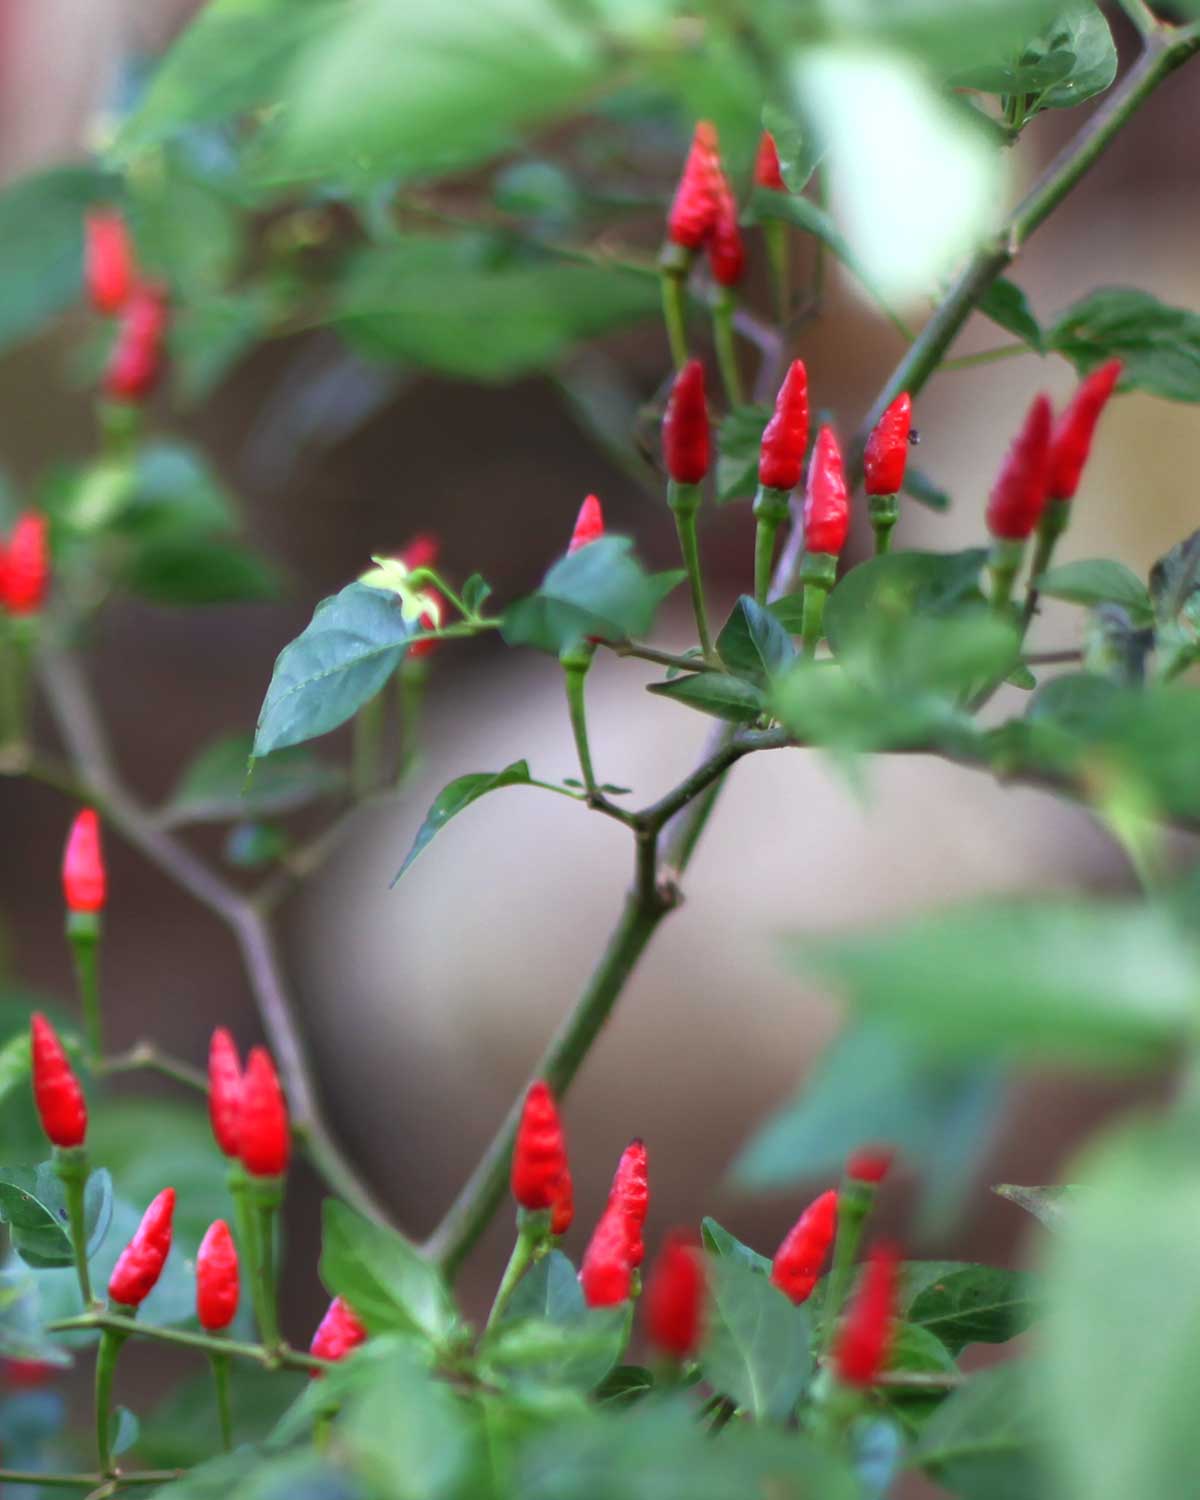 Red chili growing in the garden